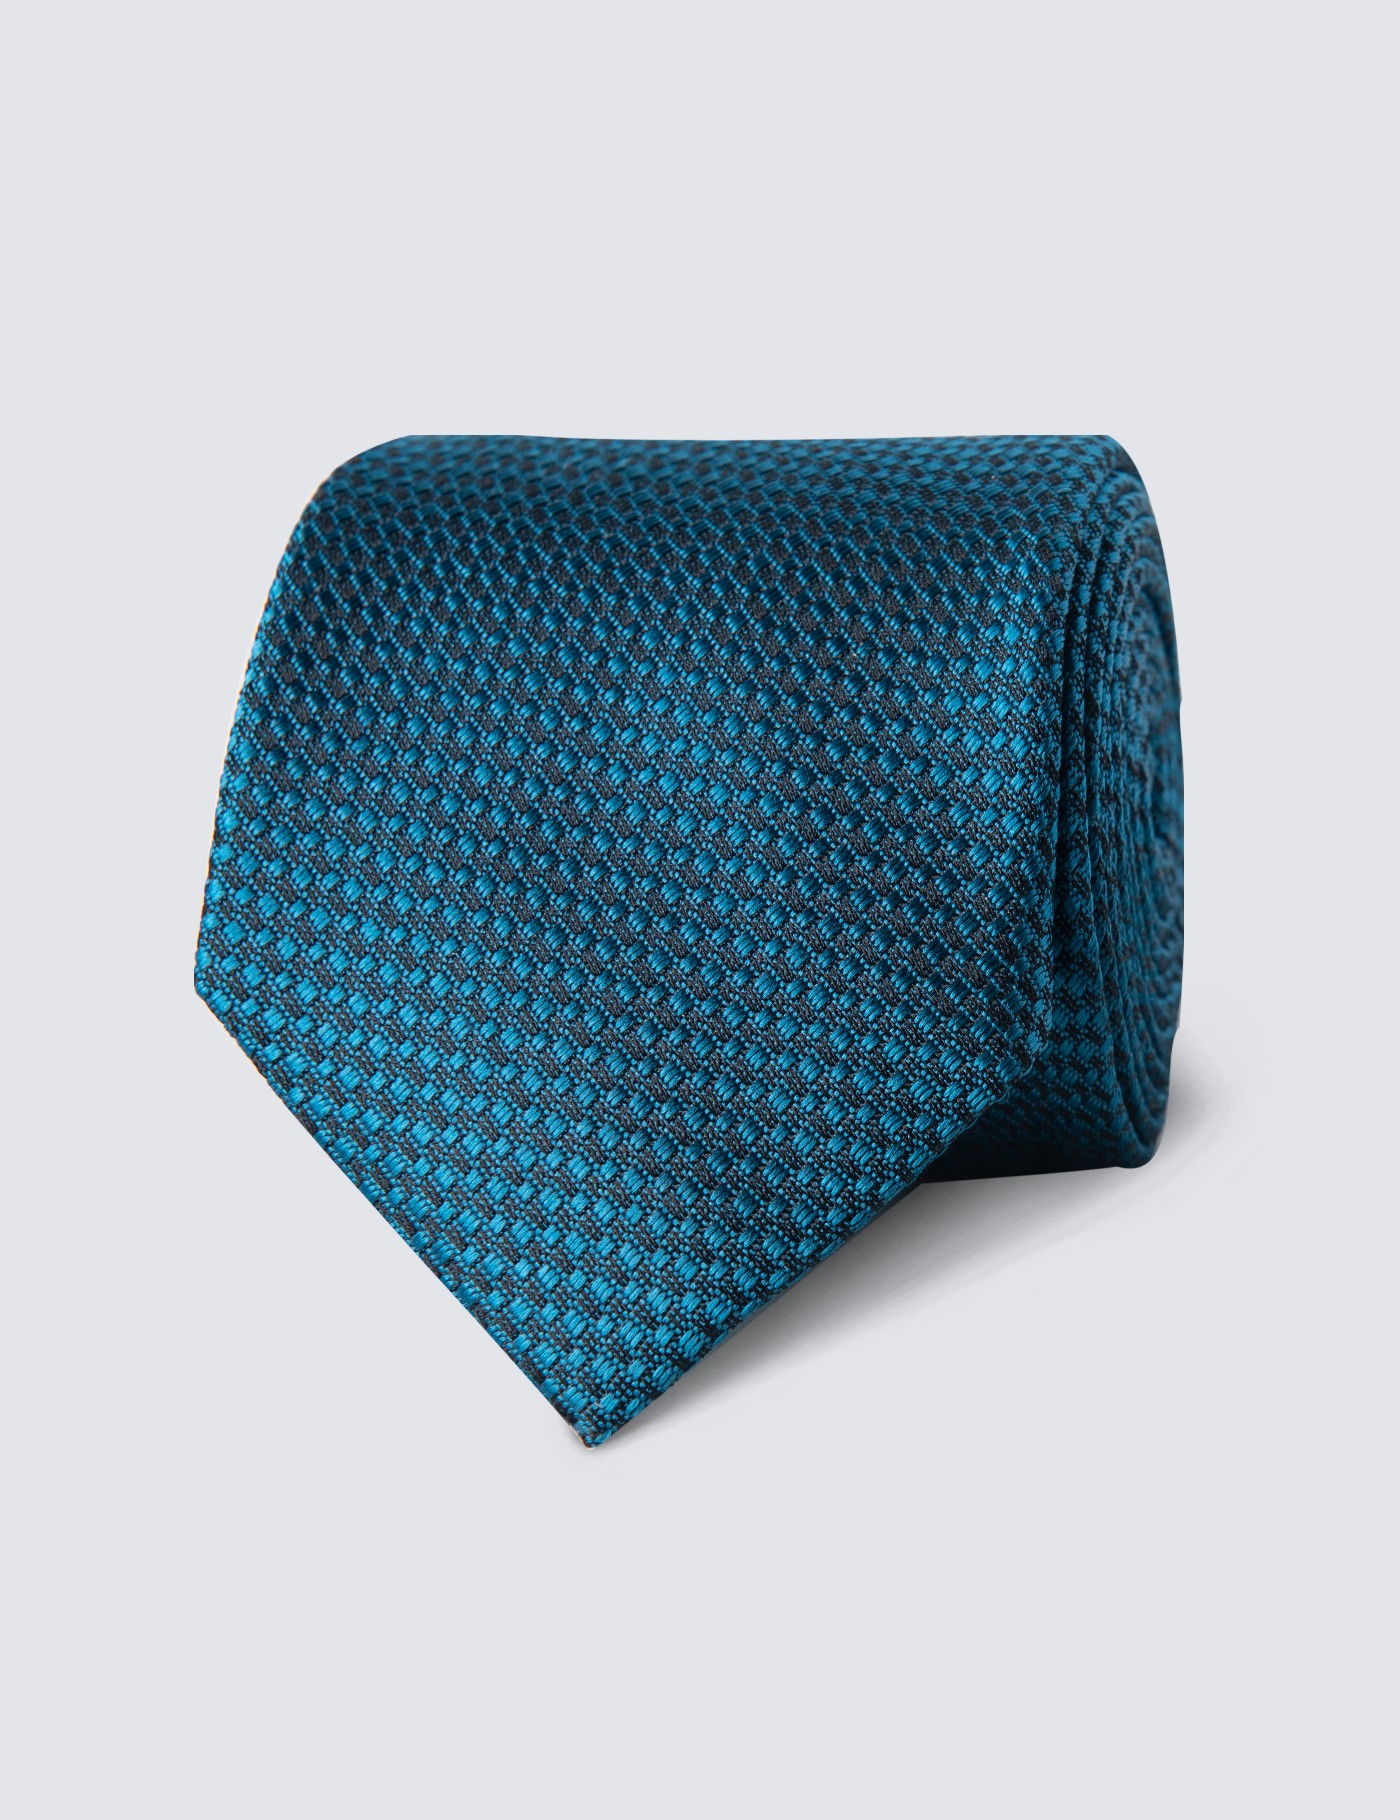 Men's Teal Textured Plain Tie - 100% Silk | Hawes and Curtis